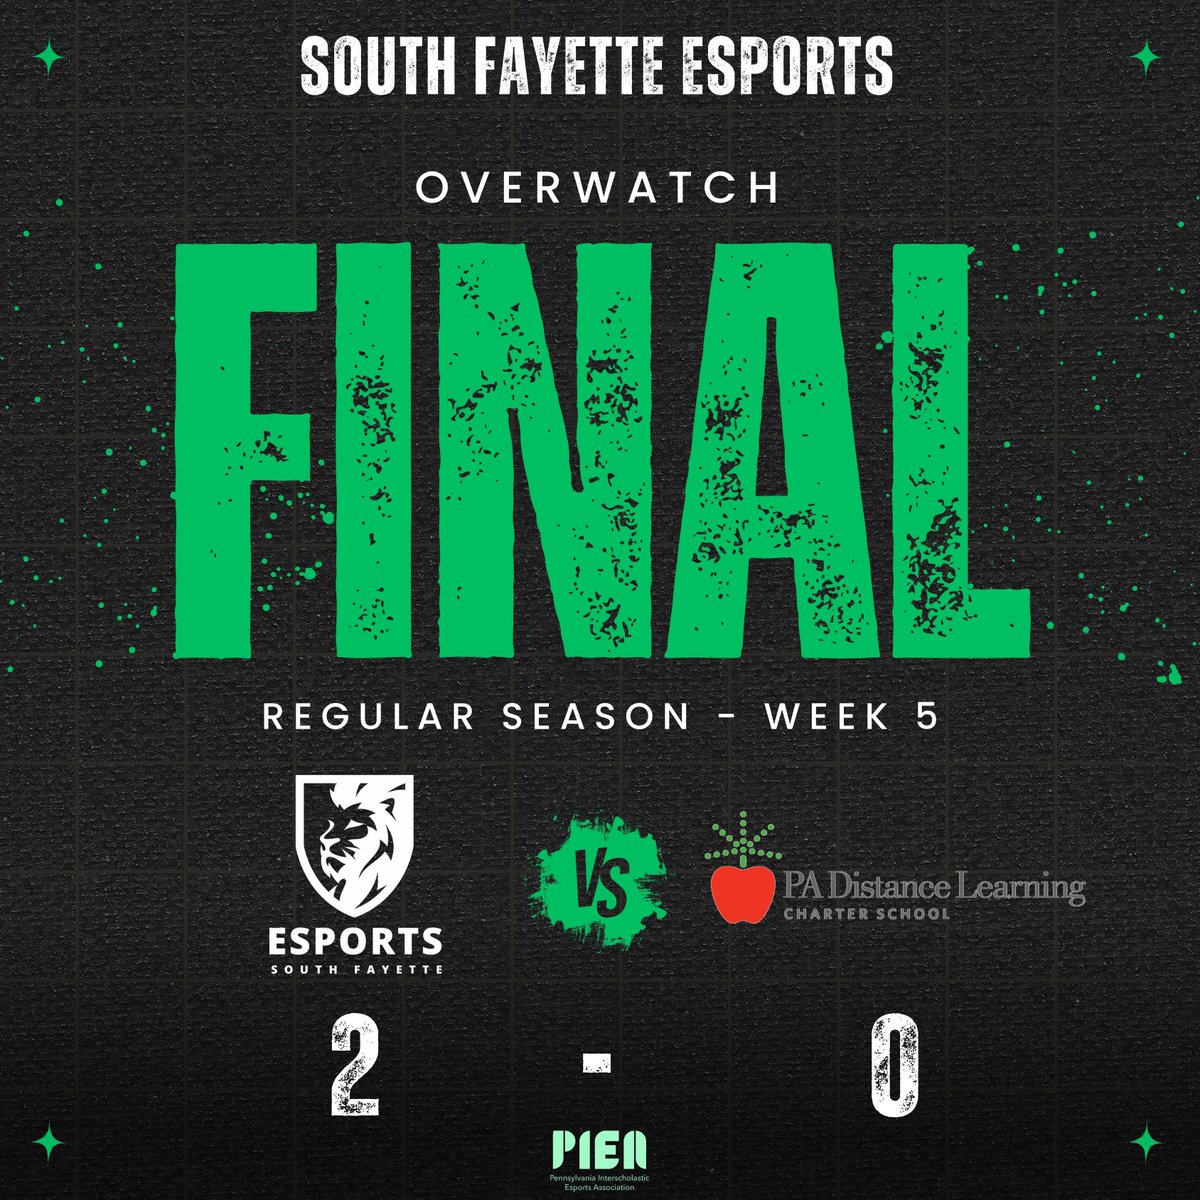 Congrats to our HS Overwatch team for a dominant Week 5 performance! Watch the replay and listen to Lincoln's shoutcasting on our Twitch Channel! #SFLionPride #SFHSLionPride